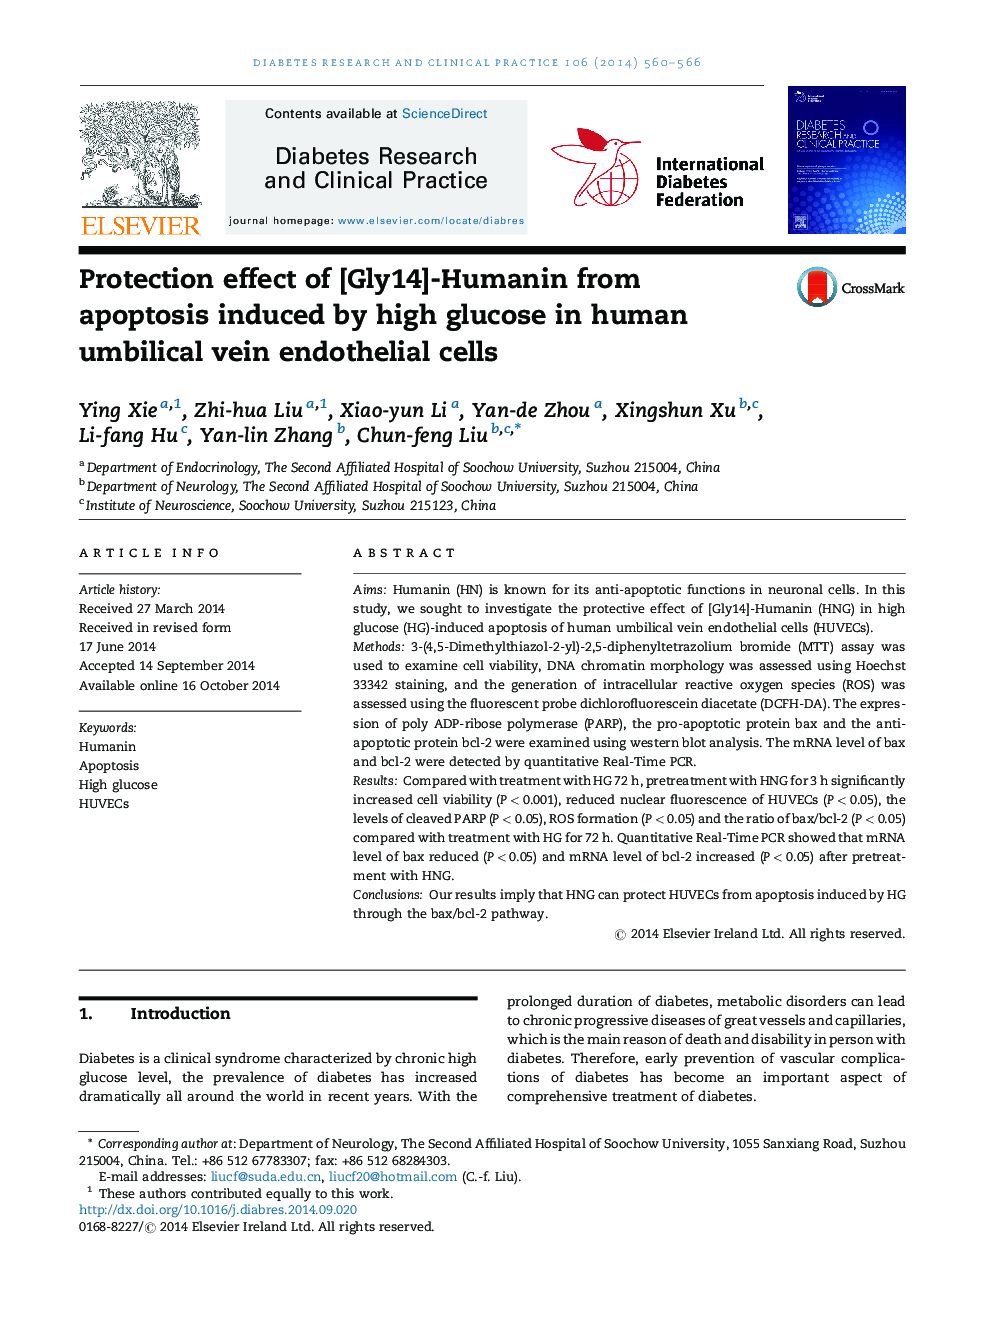 Protection effect of [Gly14]-Humanin from apoptosis induced by high glucose in human umbilical vein endothelial cells